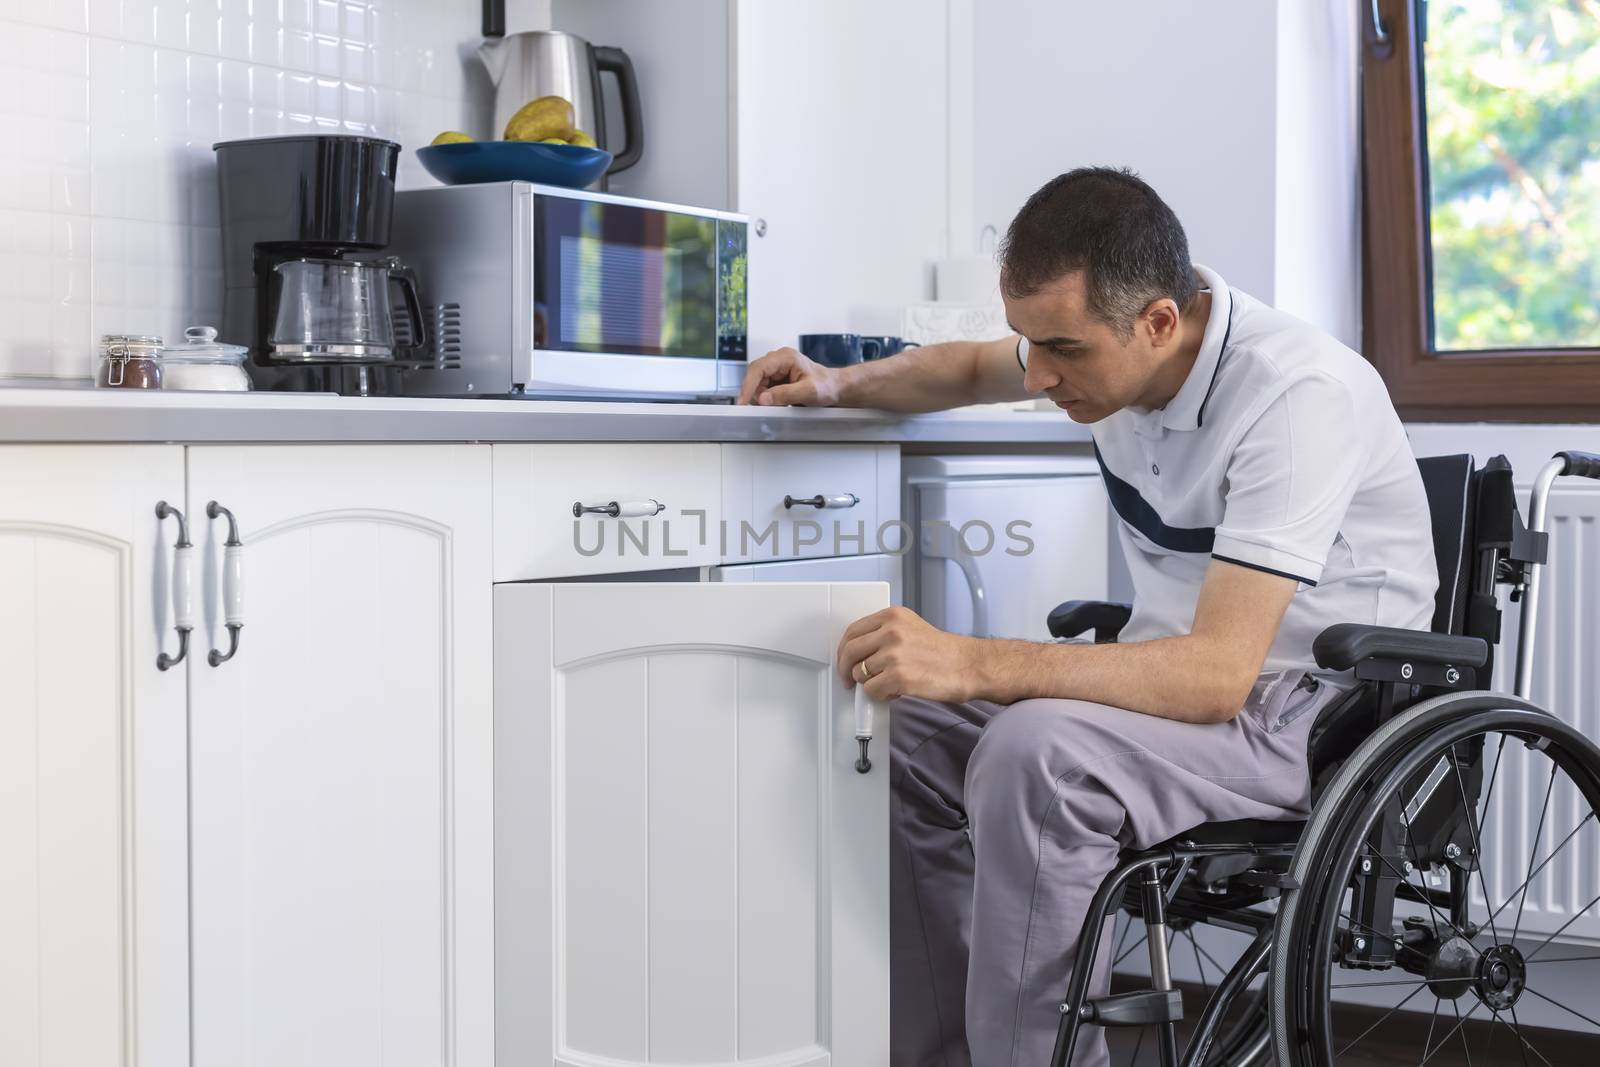 Young Handicapped Man Sitting On Wheelchair In Kitchen. Focus on his face.